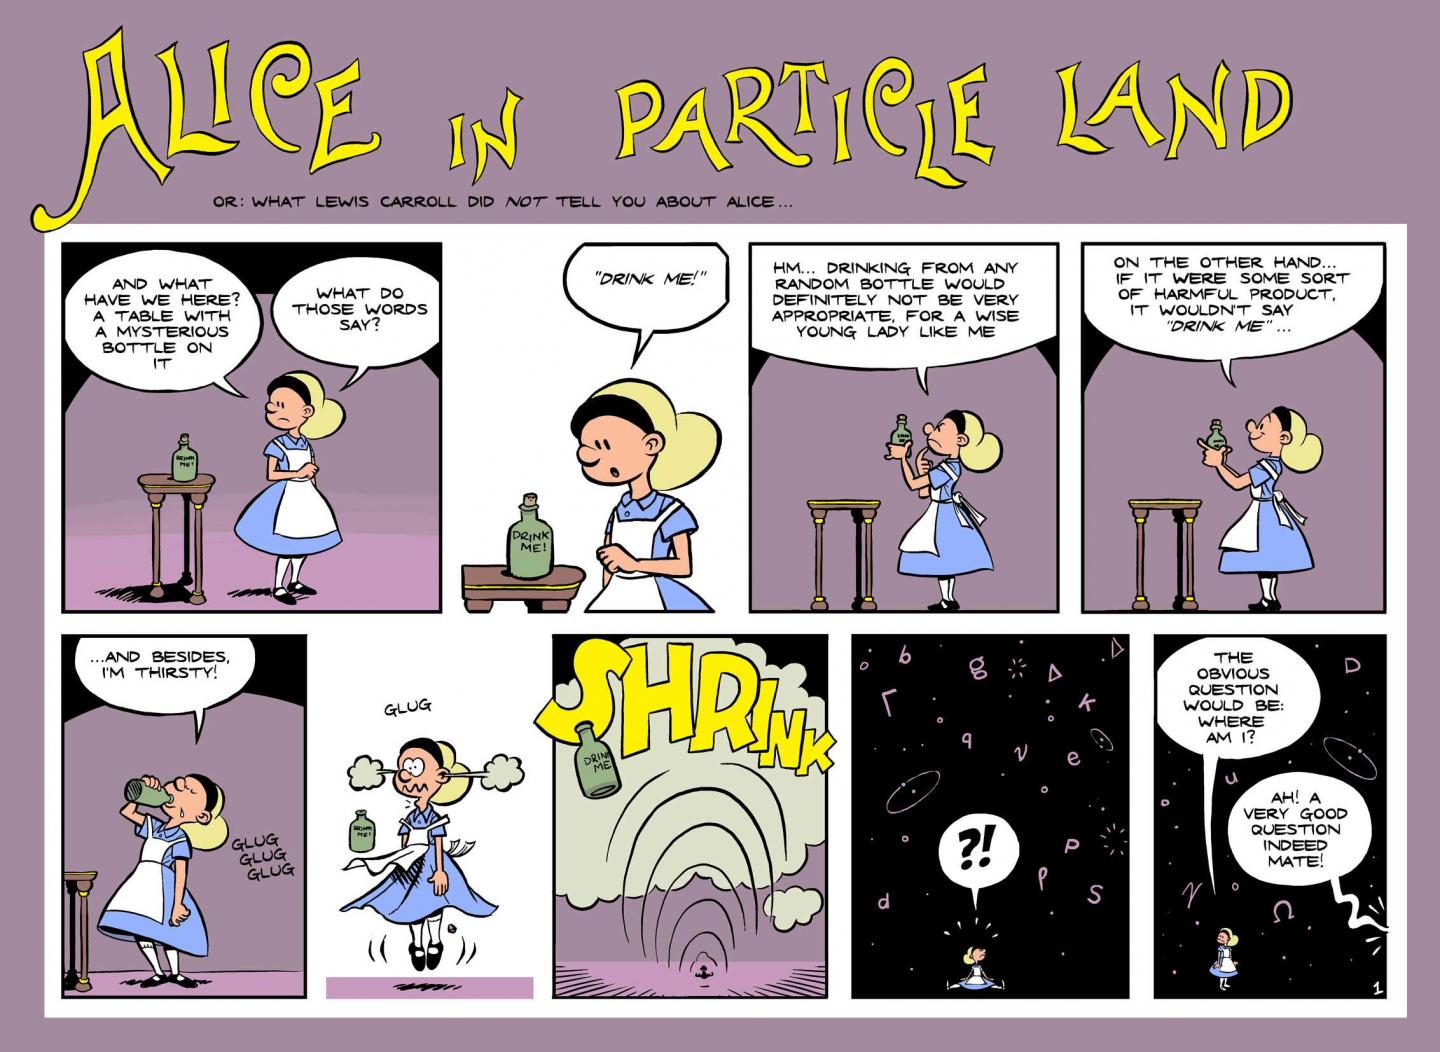 Alice goes to Particleland